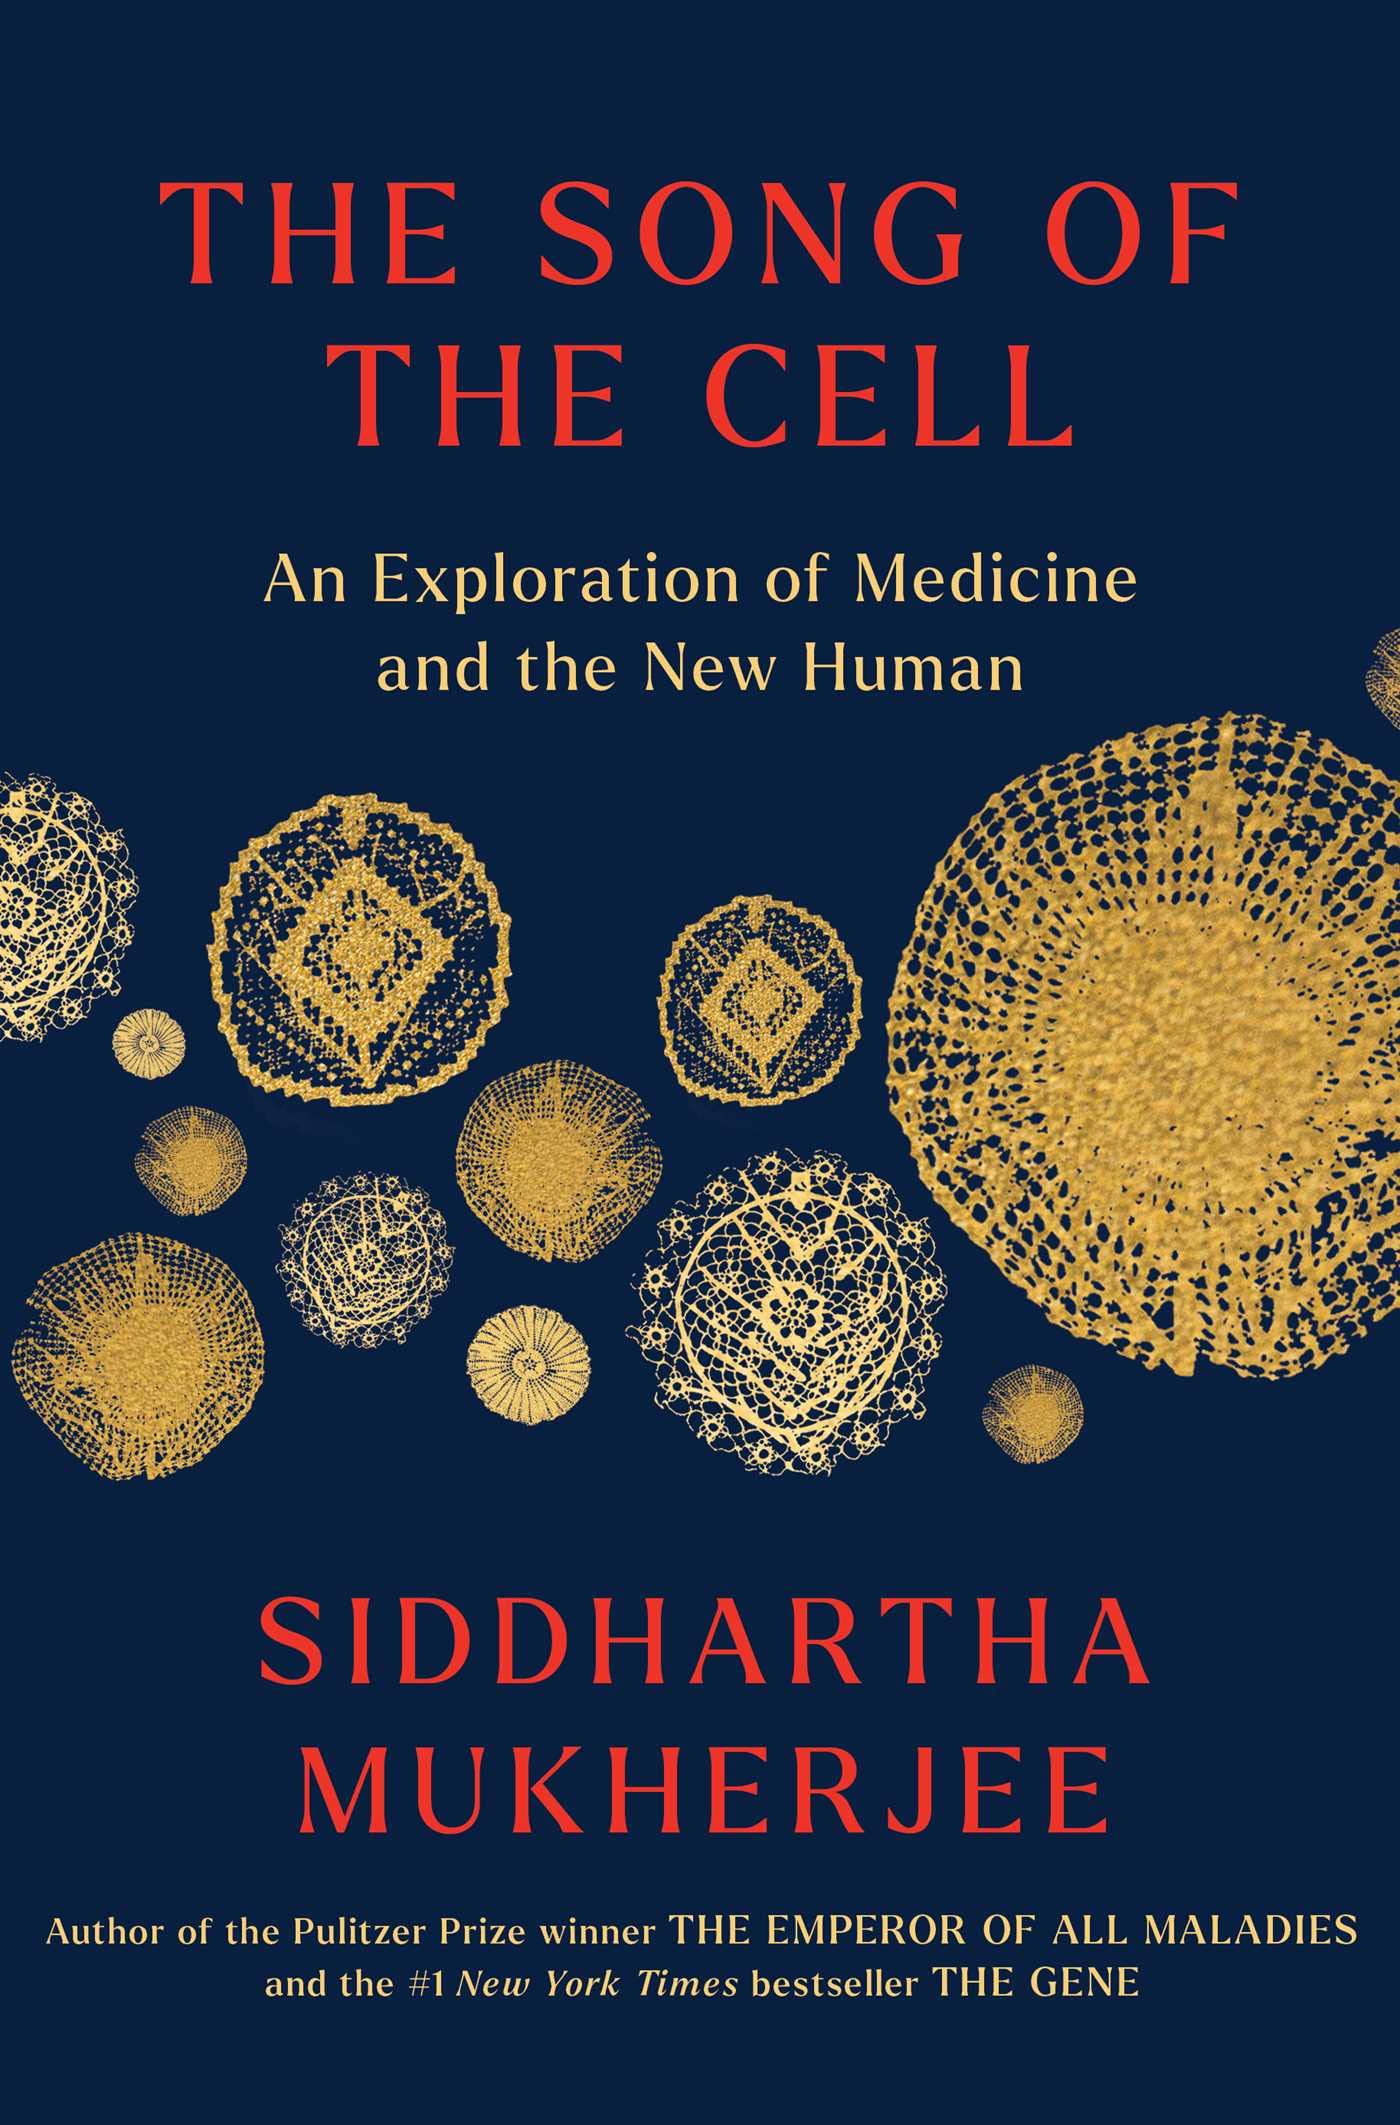 The Song of the Cell // An Exploration of Medicine and the New Human